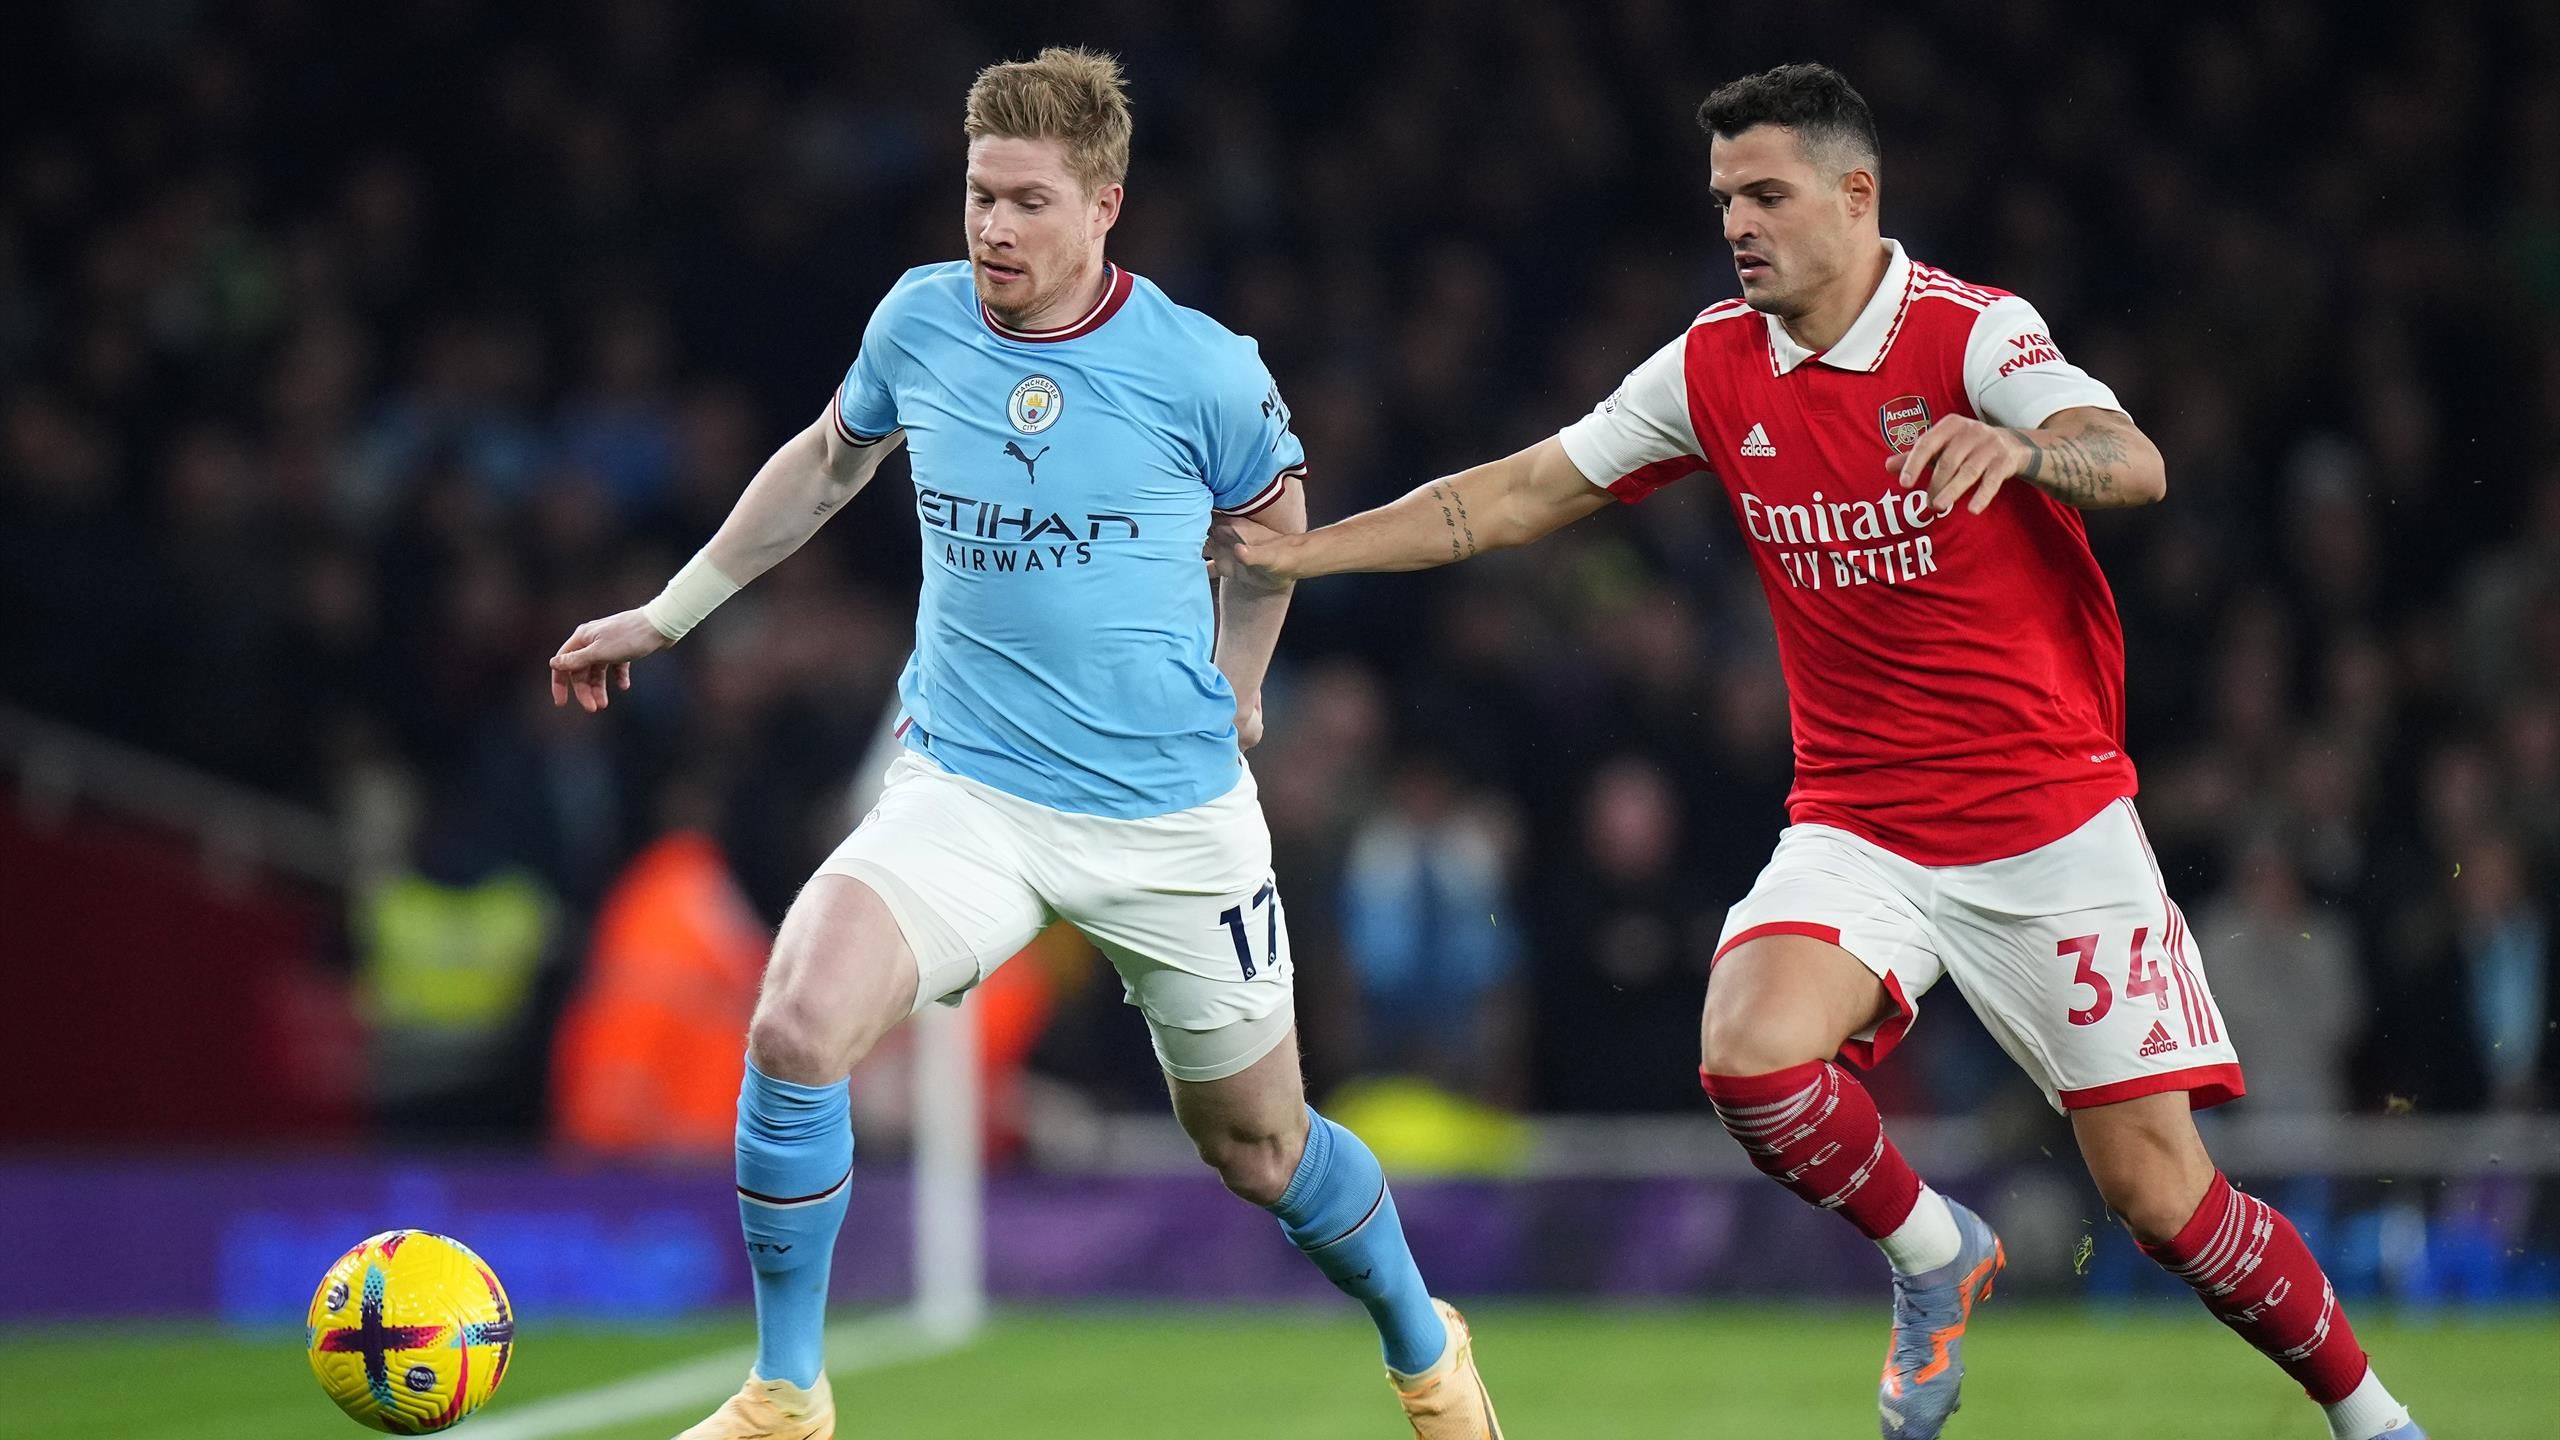 Manchester City v Arsenal How to watch crunch Premier League encounter, TV channel, live stream details, kick-off time